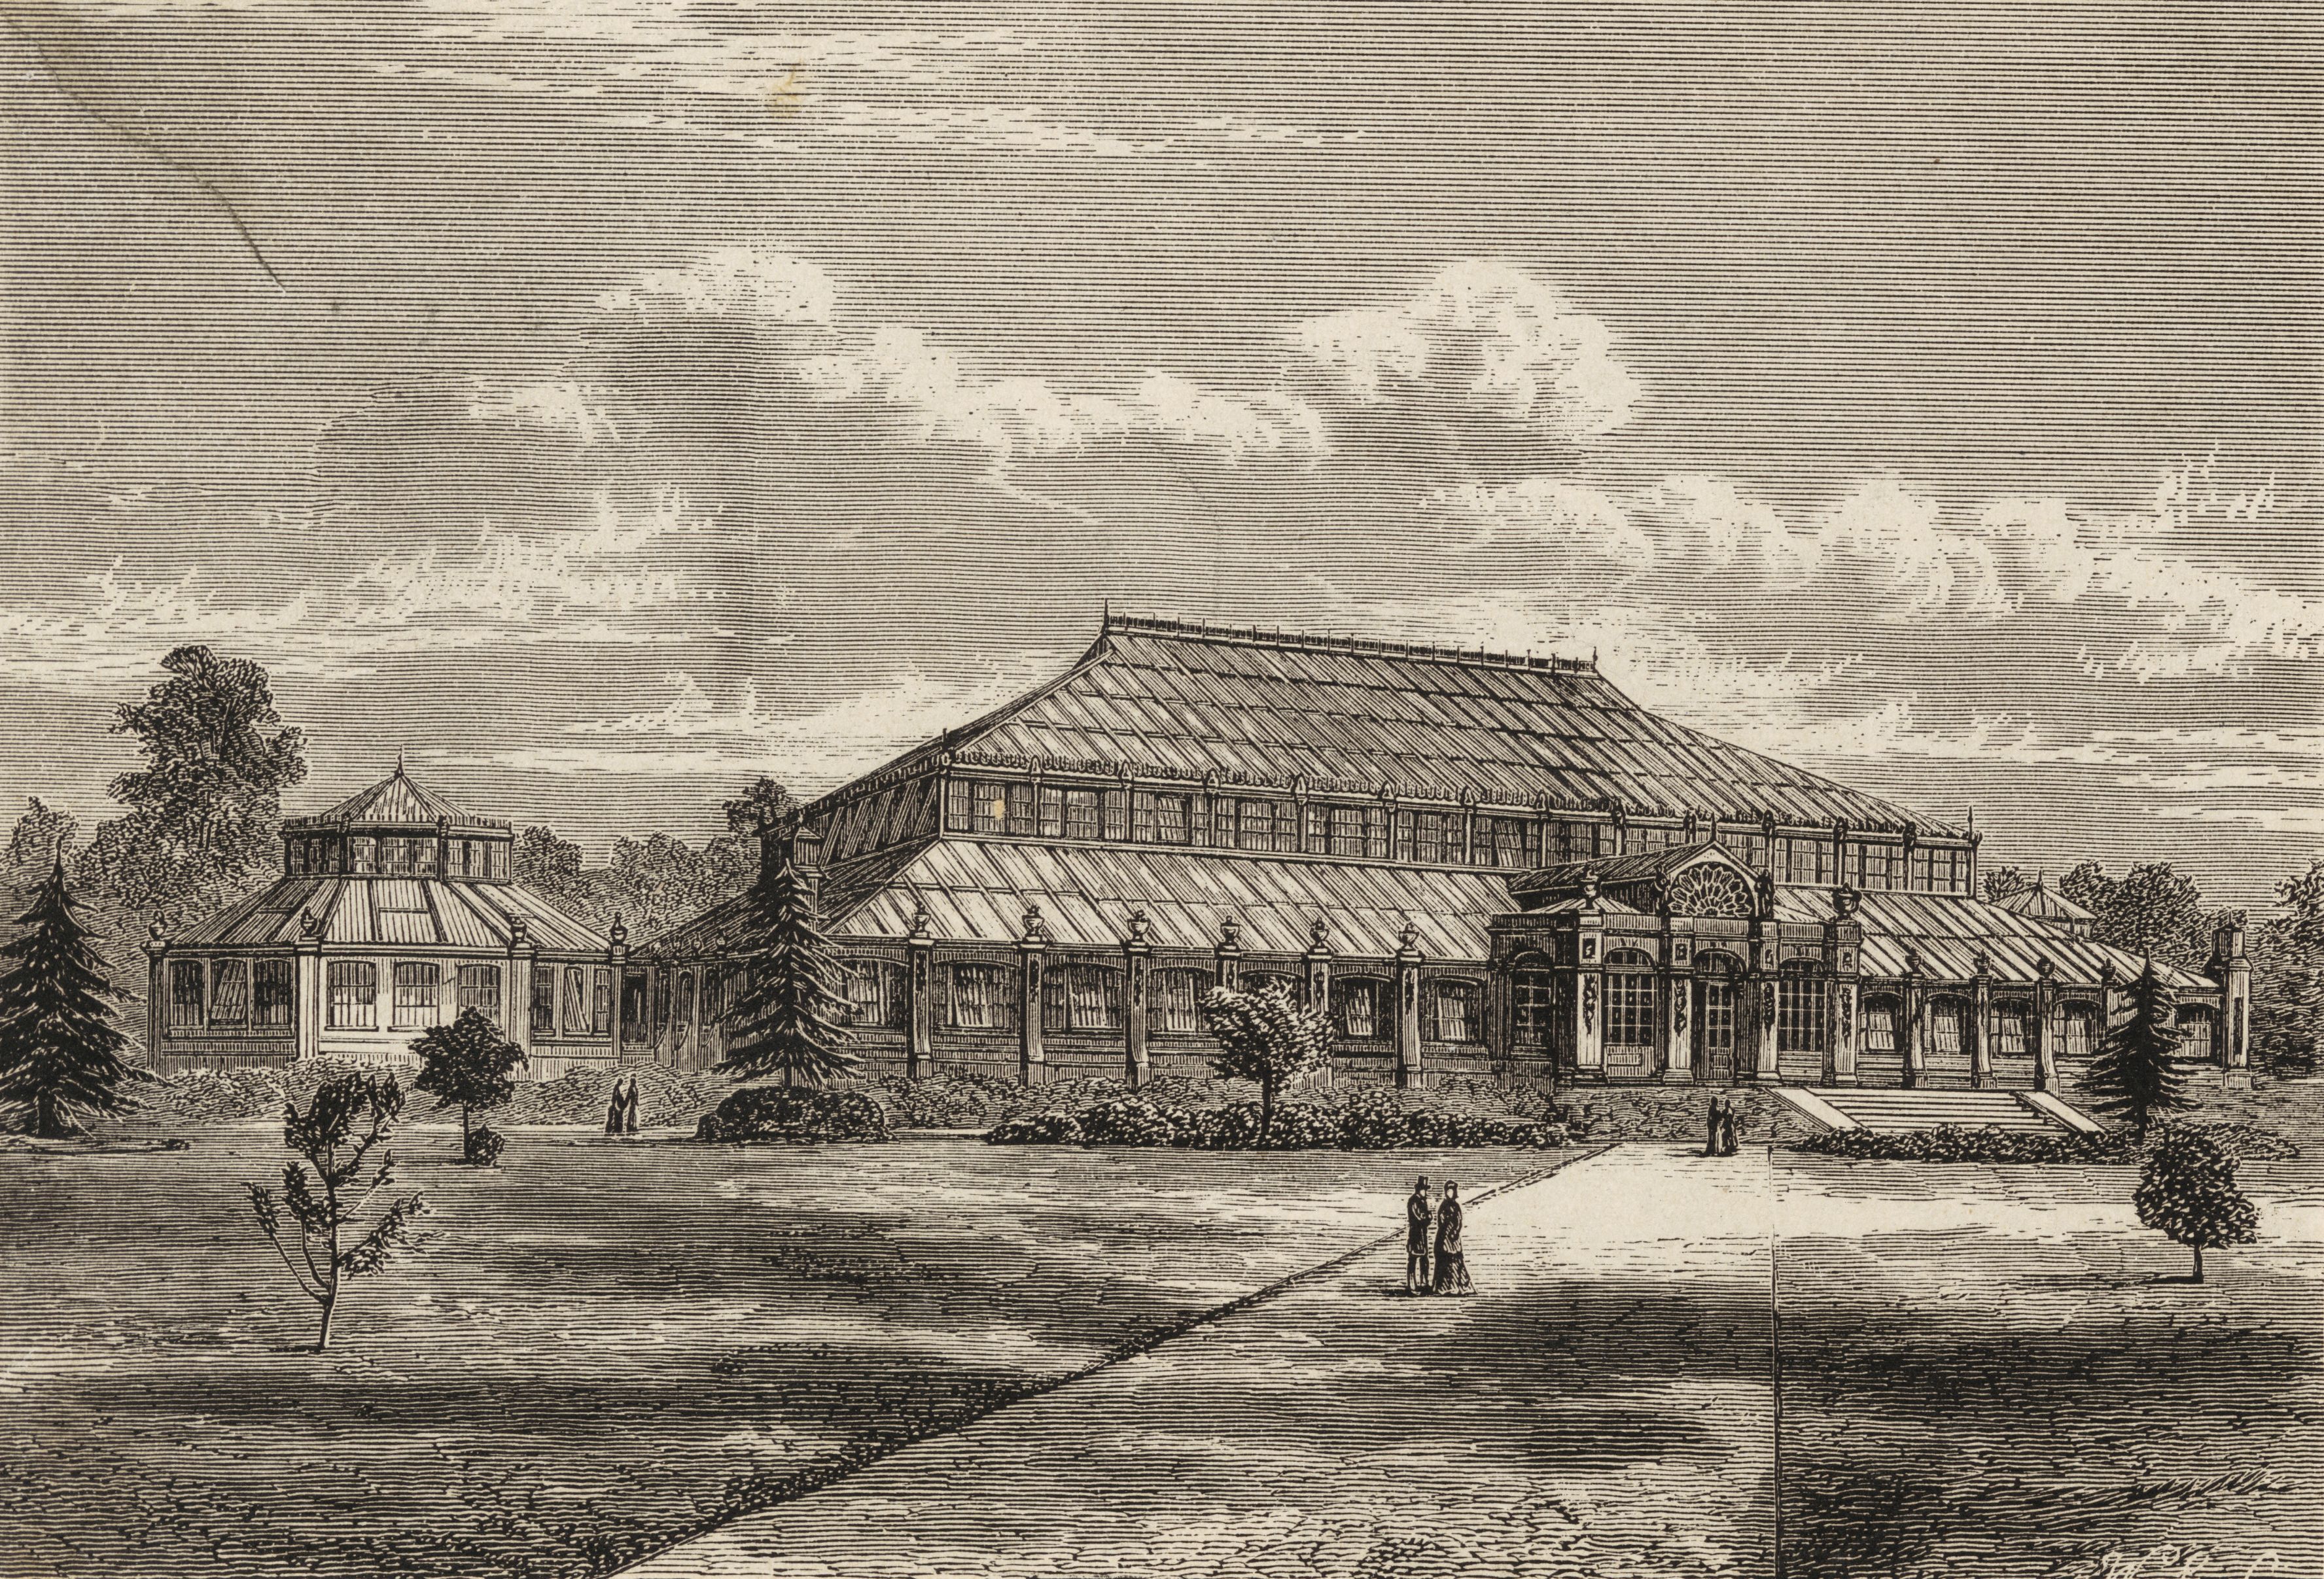 Engraving of Temperate House from 1895 